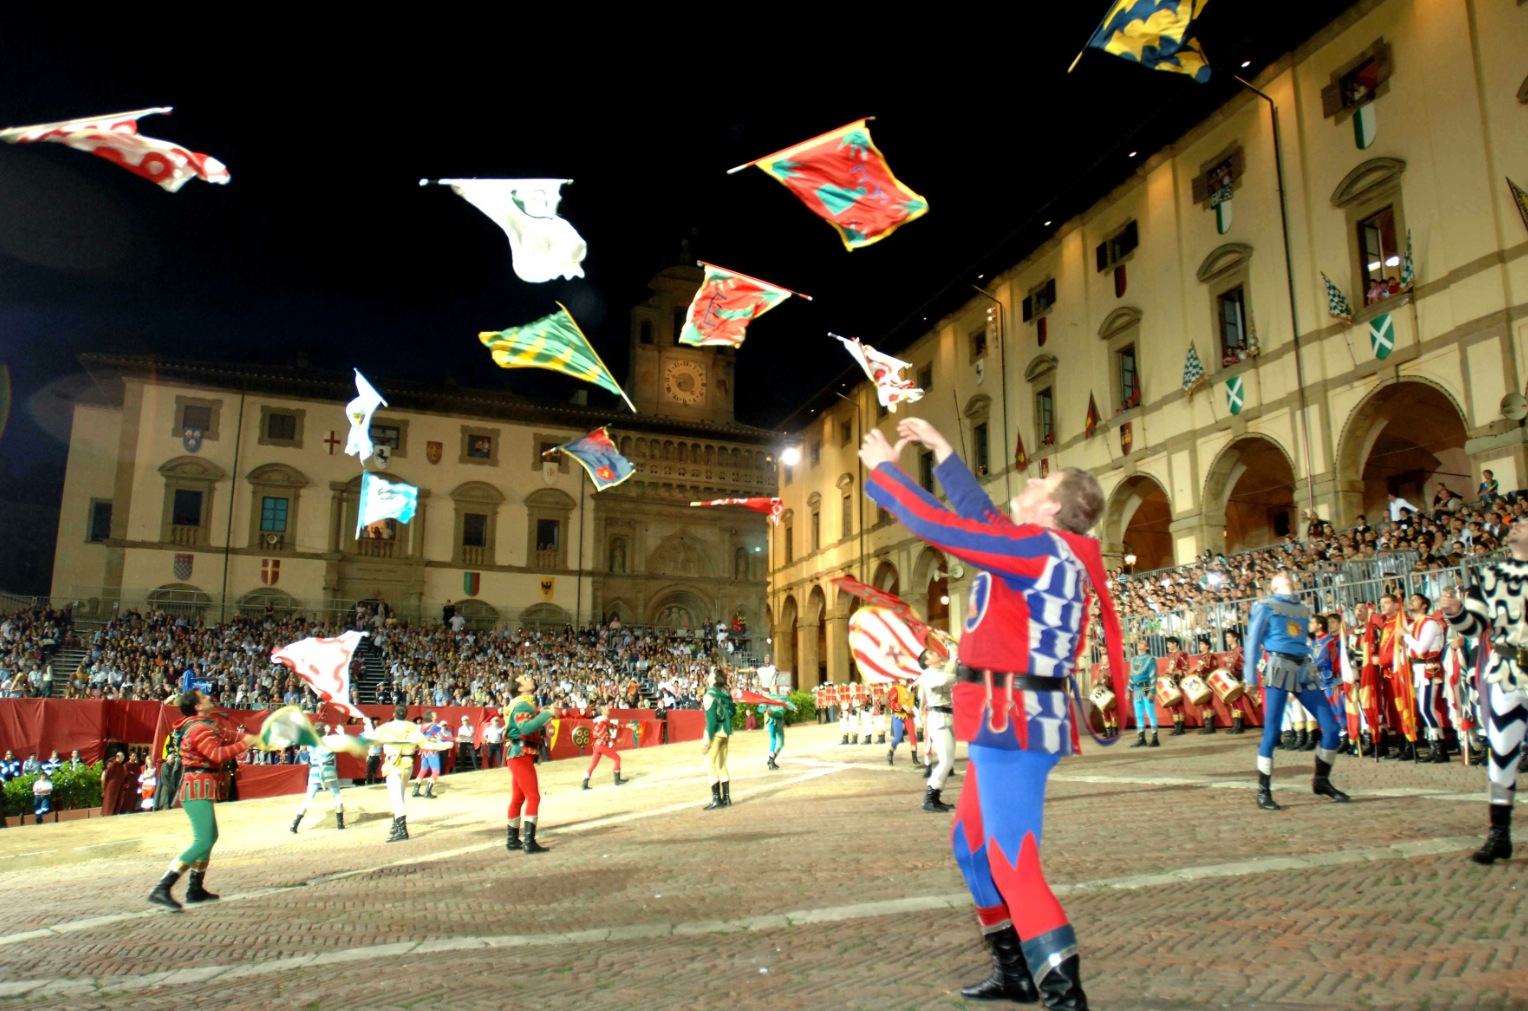 Flag throwers at work in Arezzo